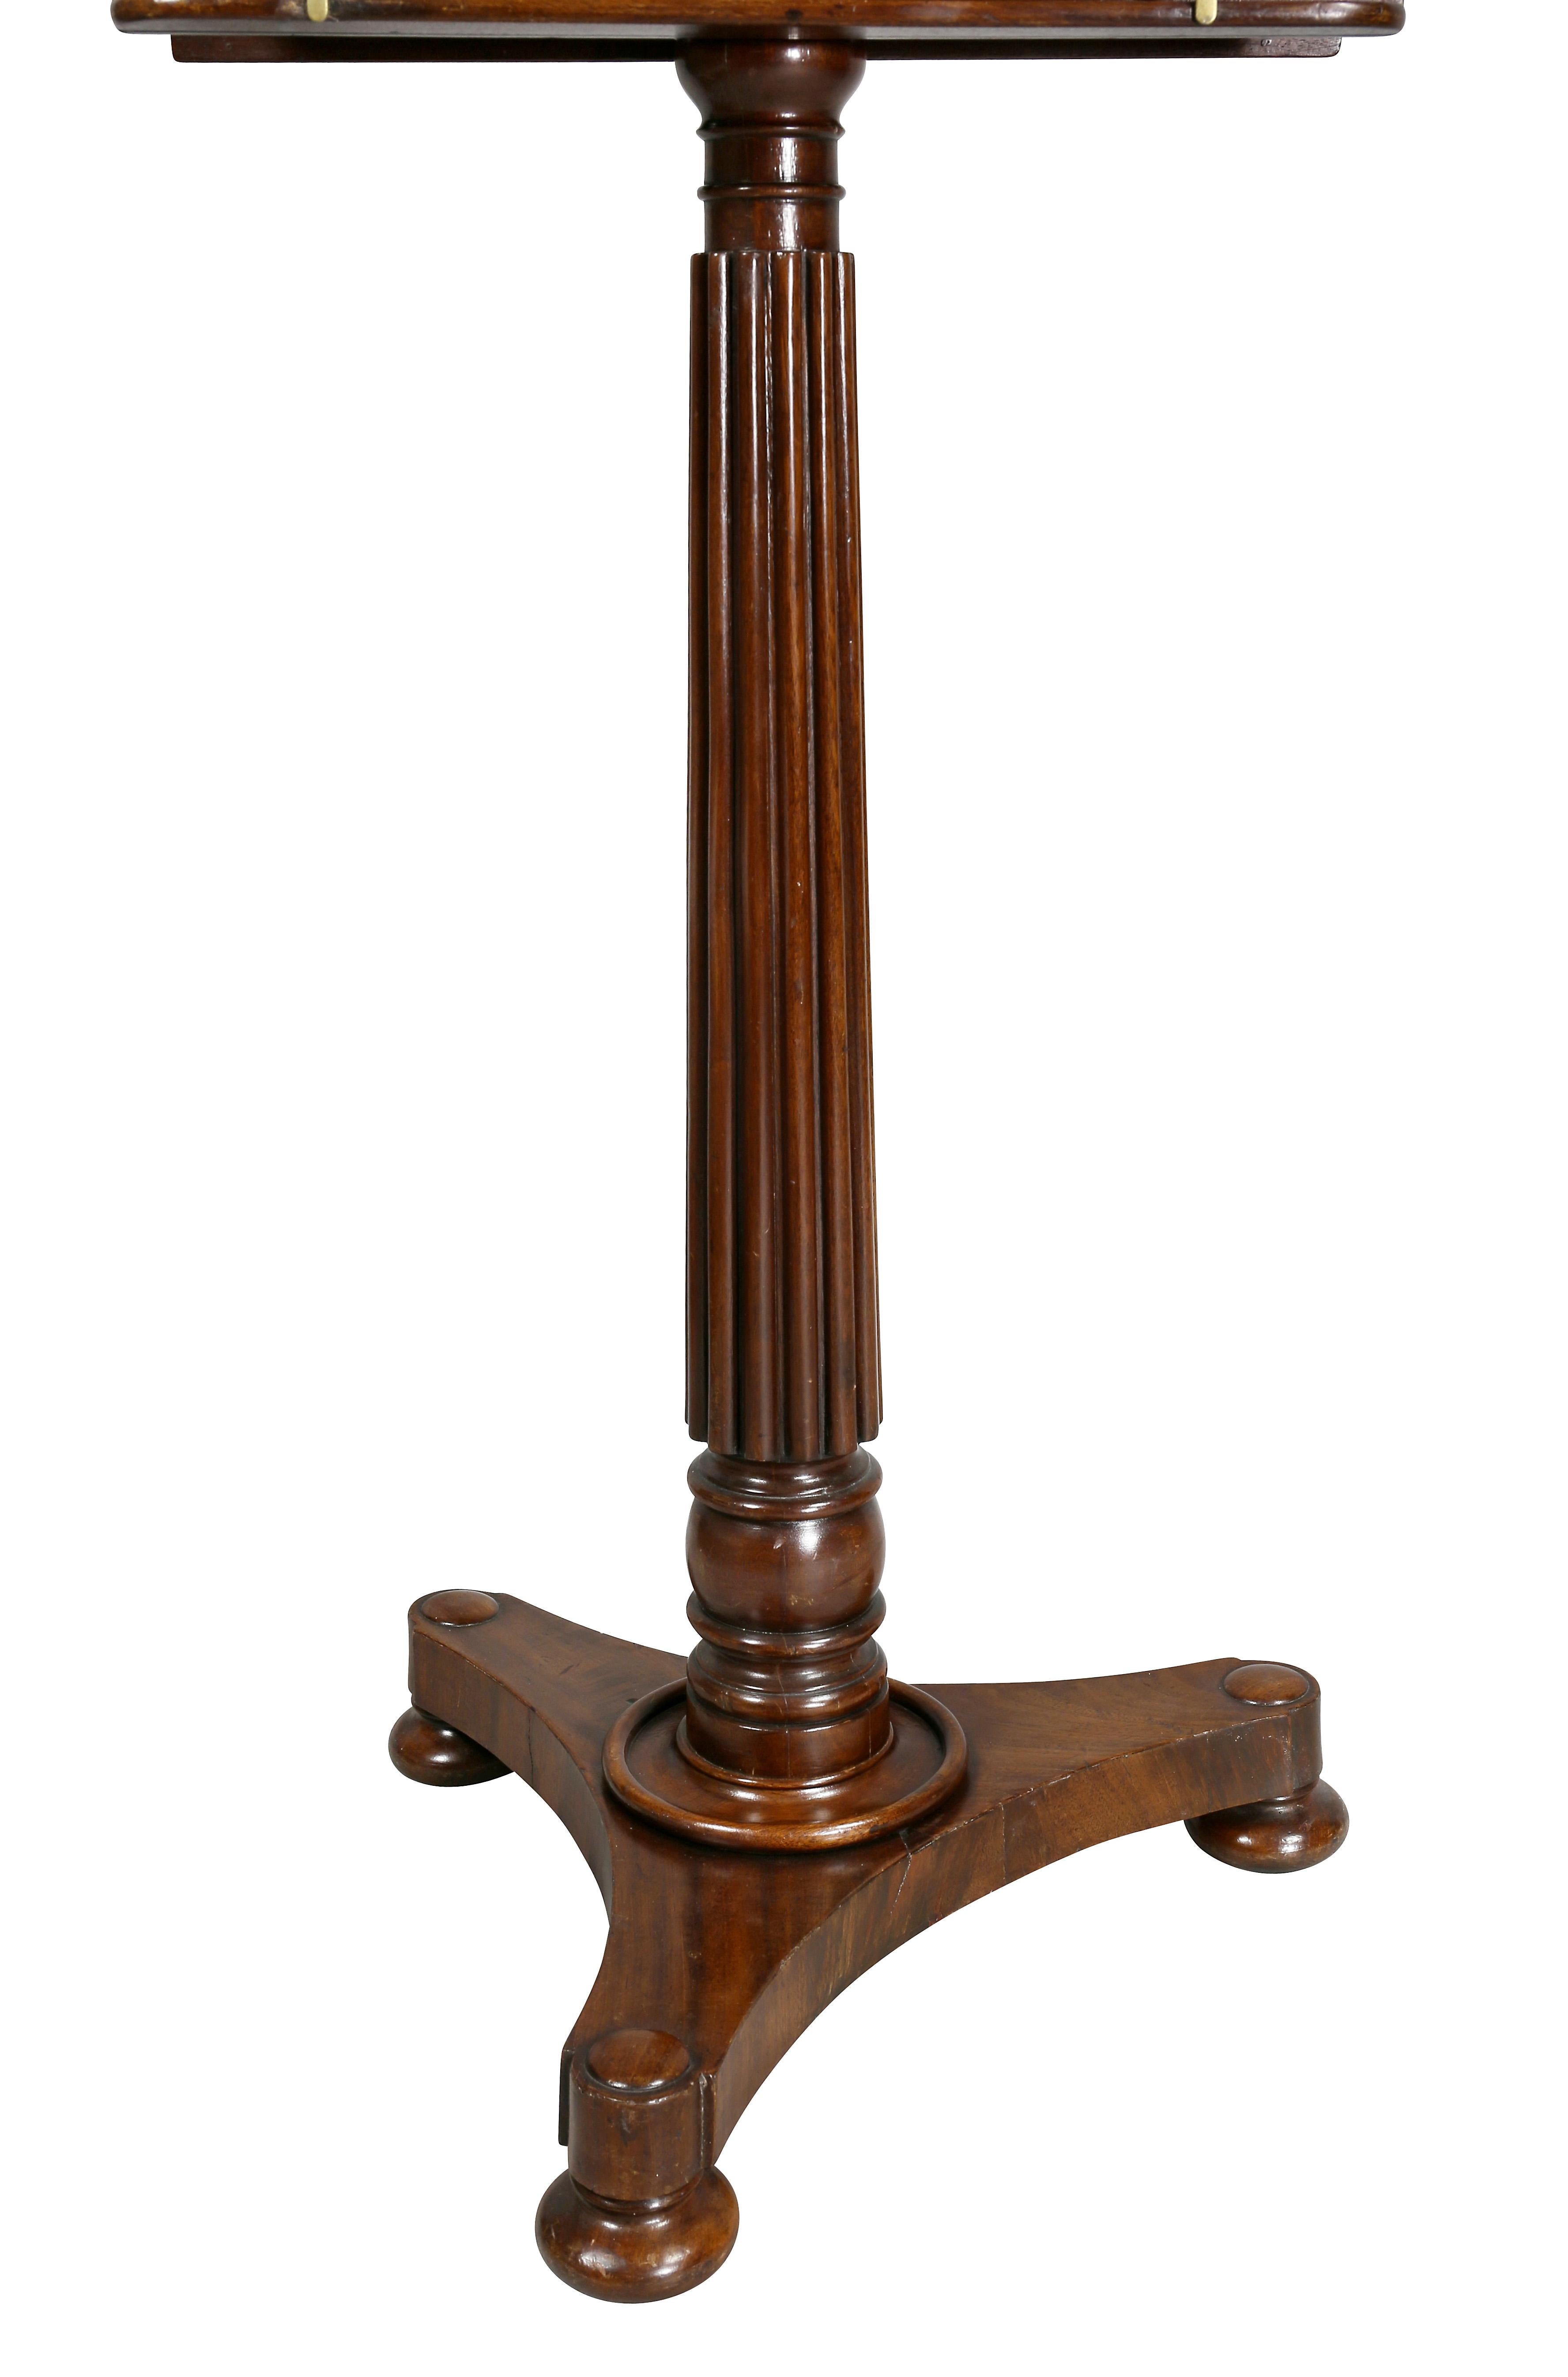 Early 19th Century William IV Mahogany Duet Music Stand For Sale